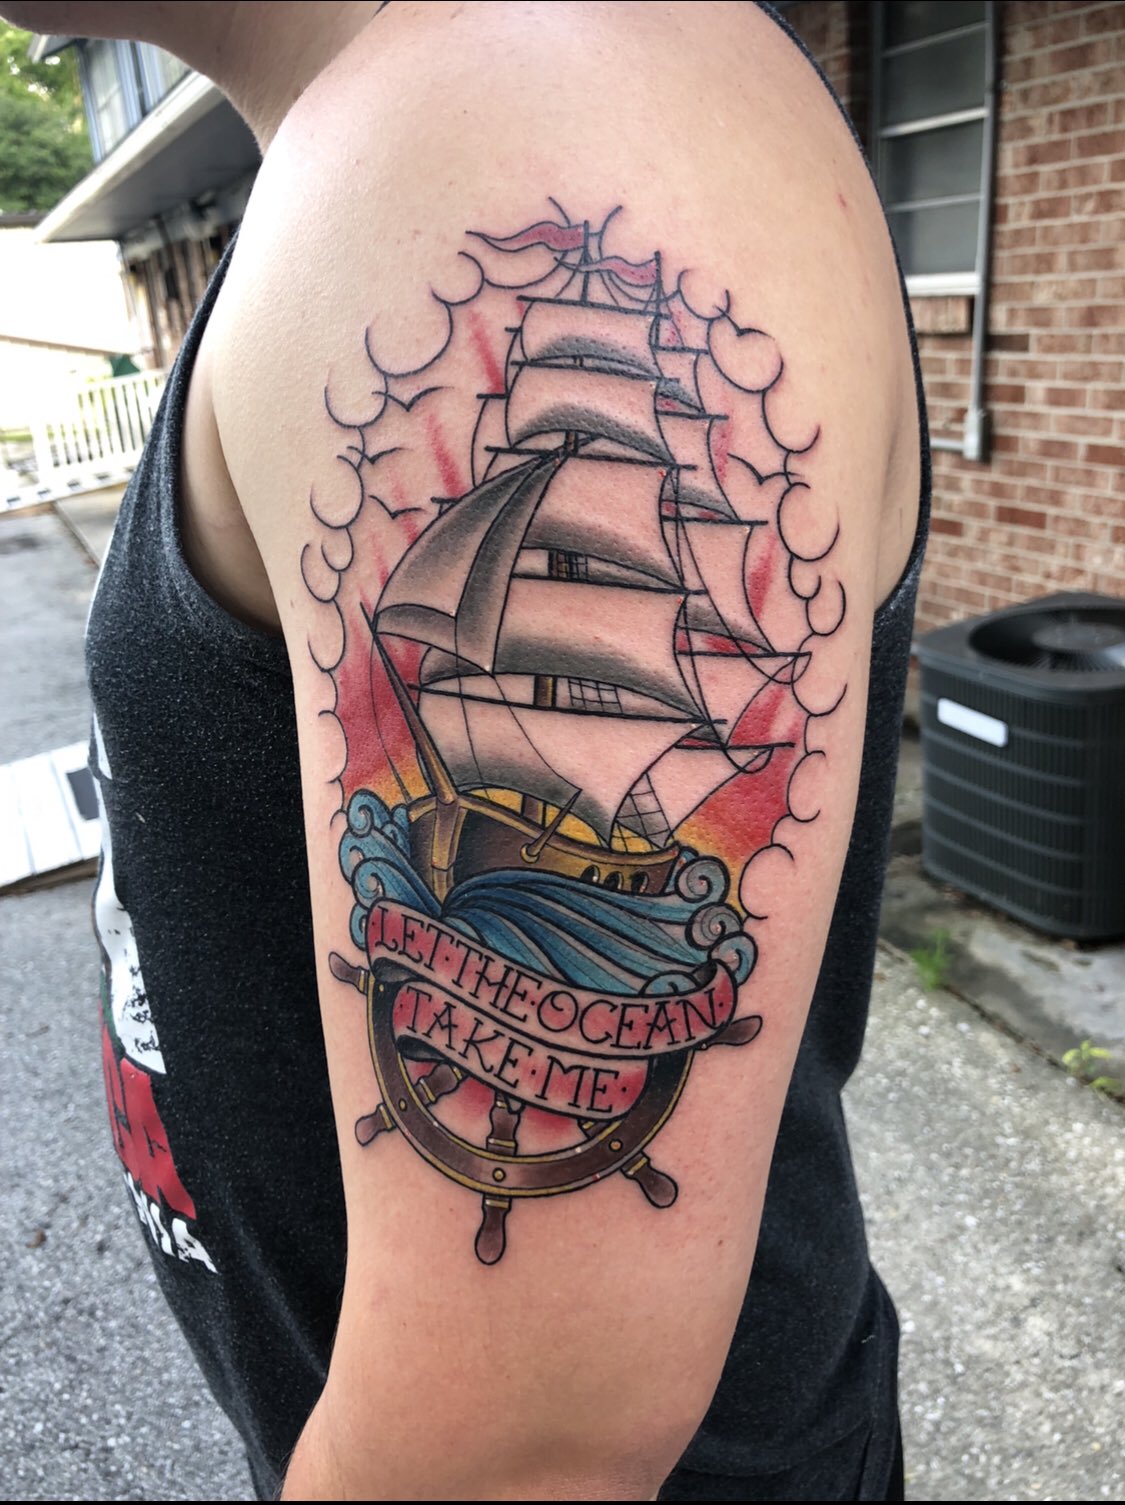 Open Letter The Amity Affliction  The amity affliction Tattoos Amity